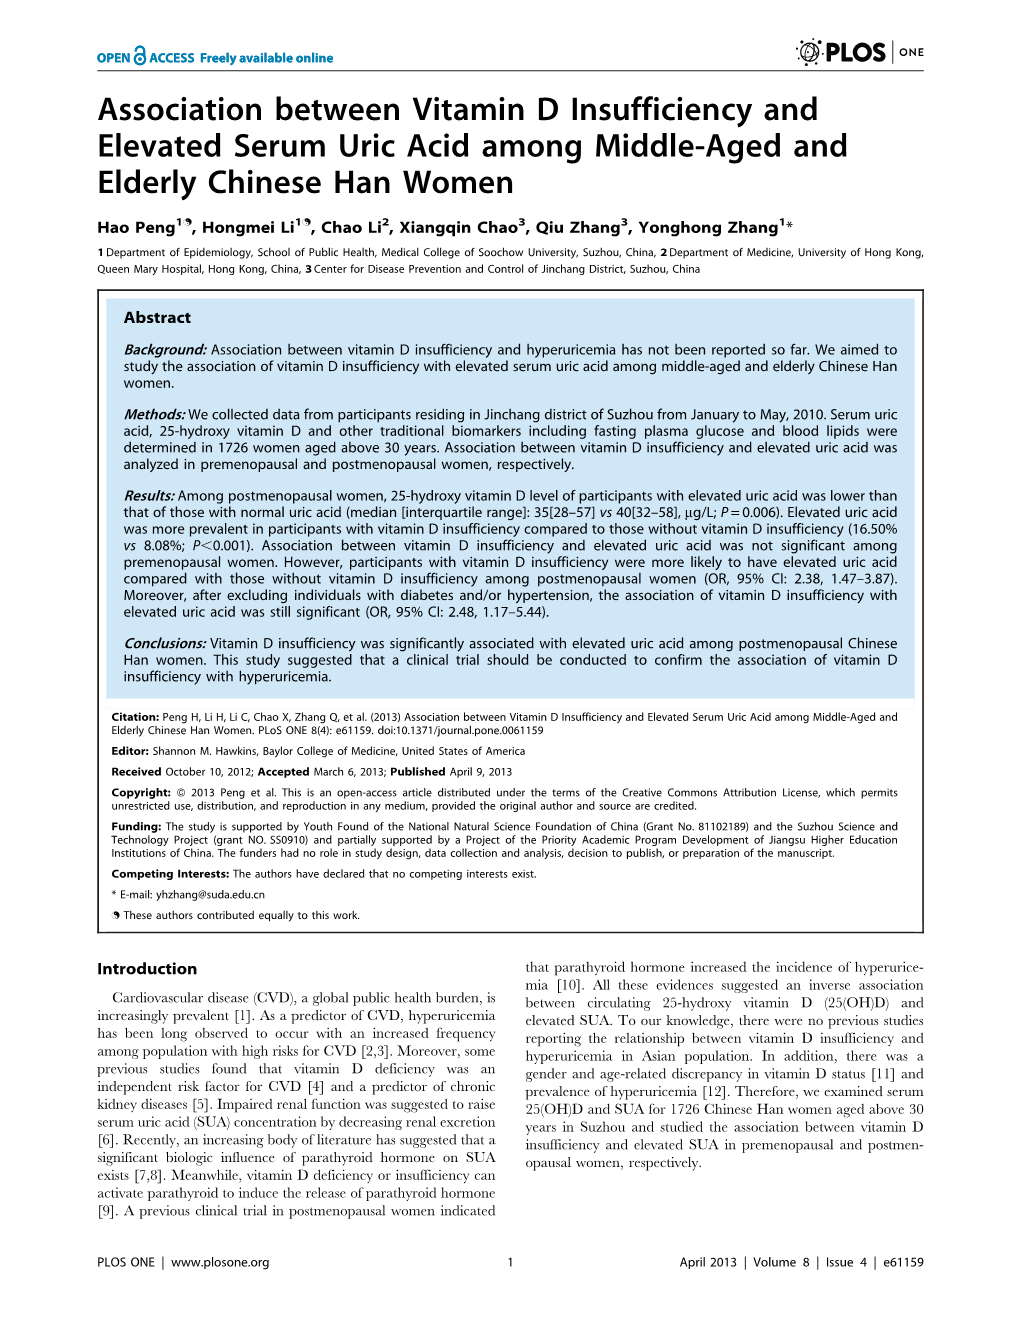 Association Between Vitamin D Insufficiency and Elevated Serum Uric Acid Among Middle-Aged and Elderly Chinese Han Women